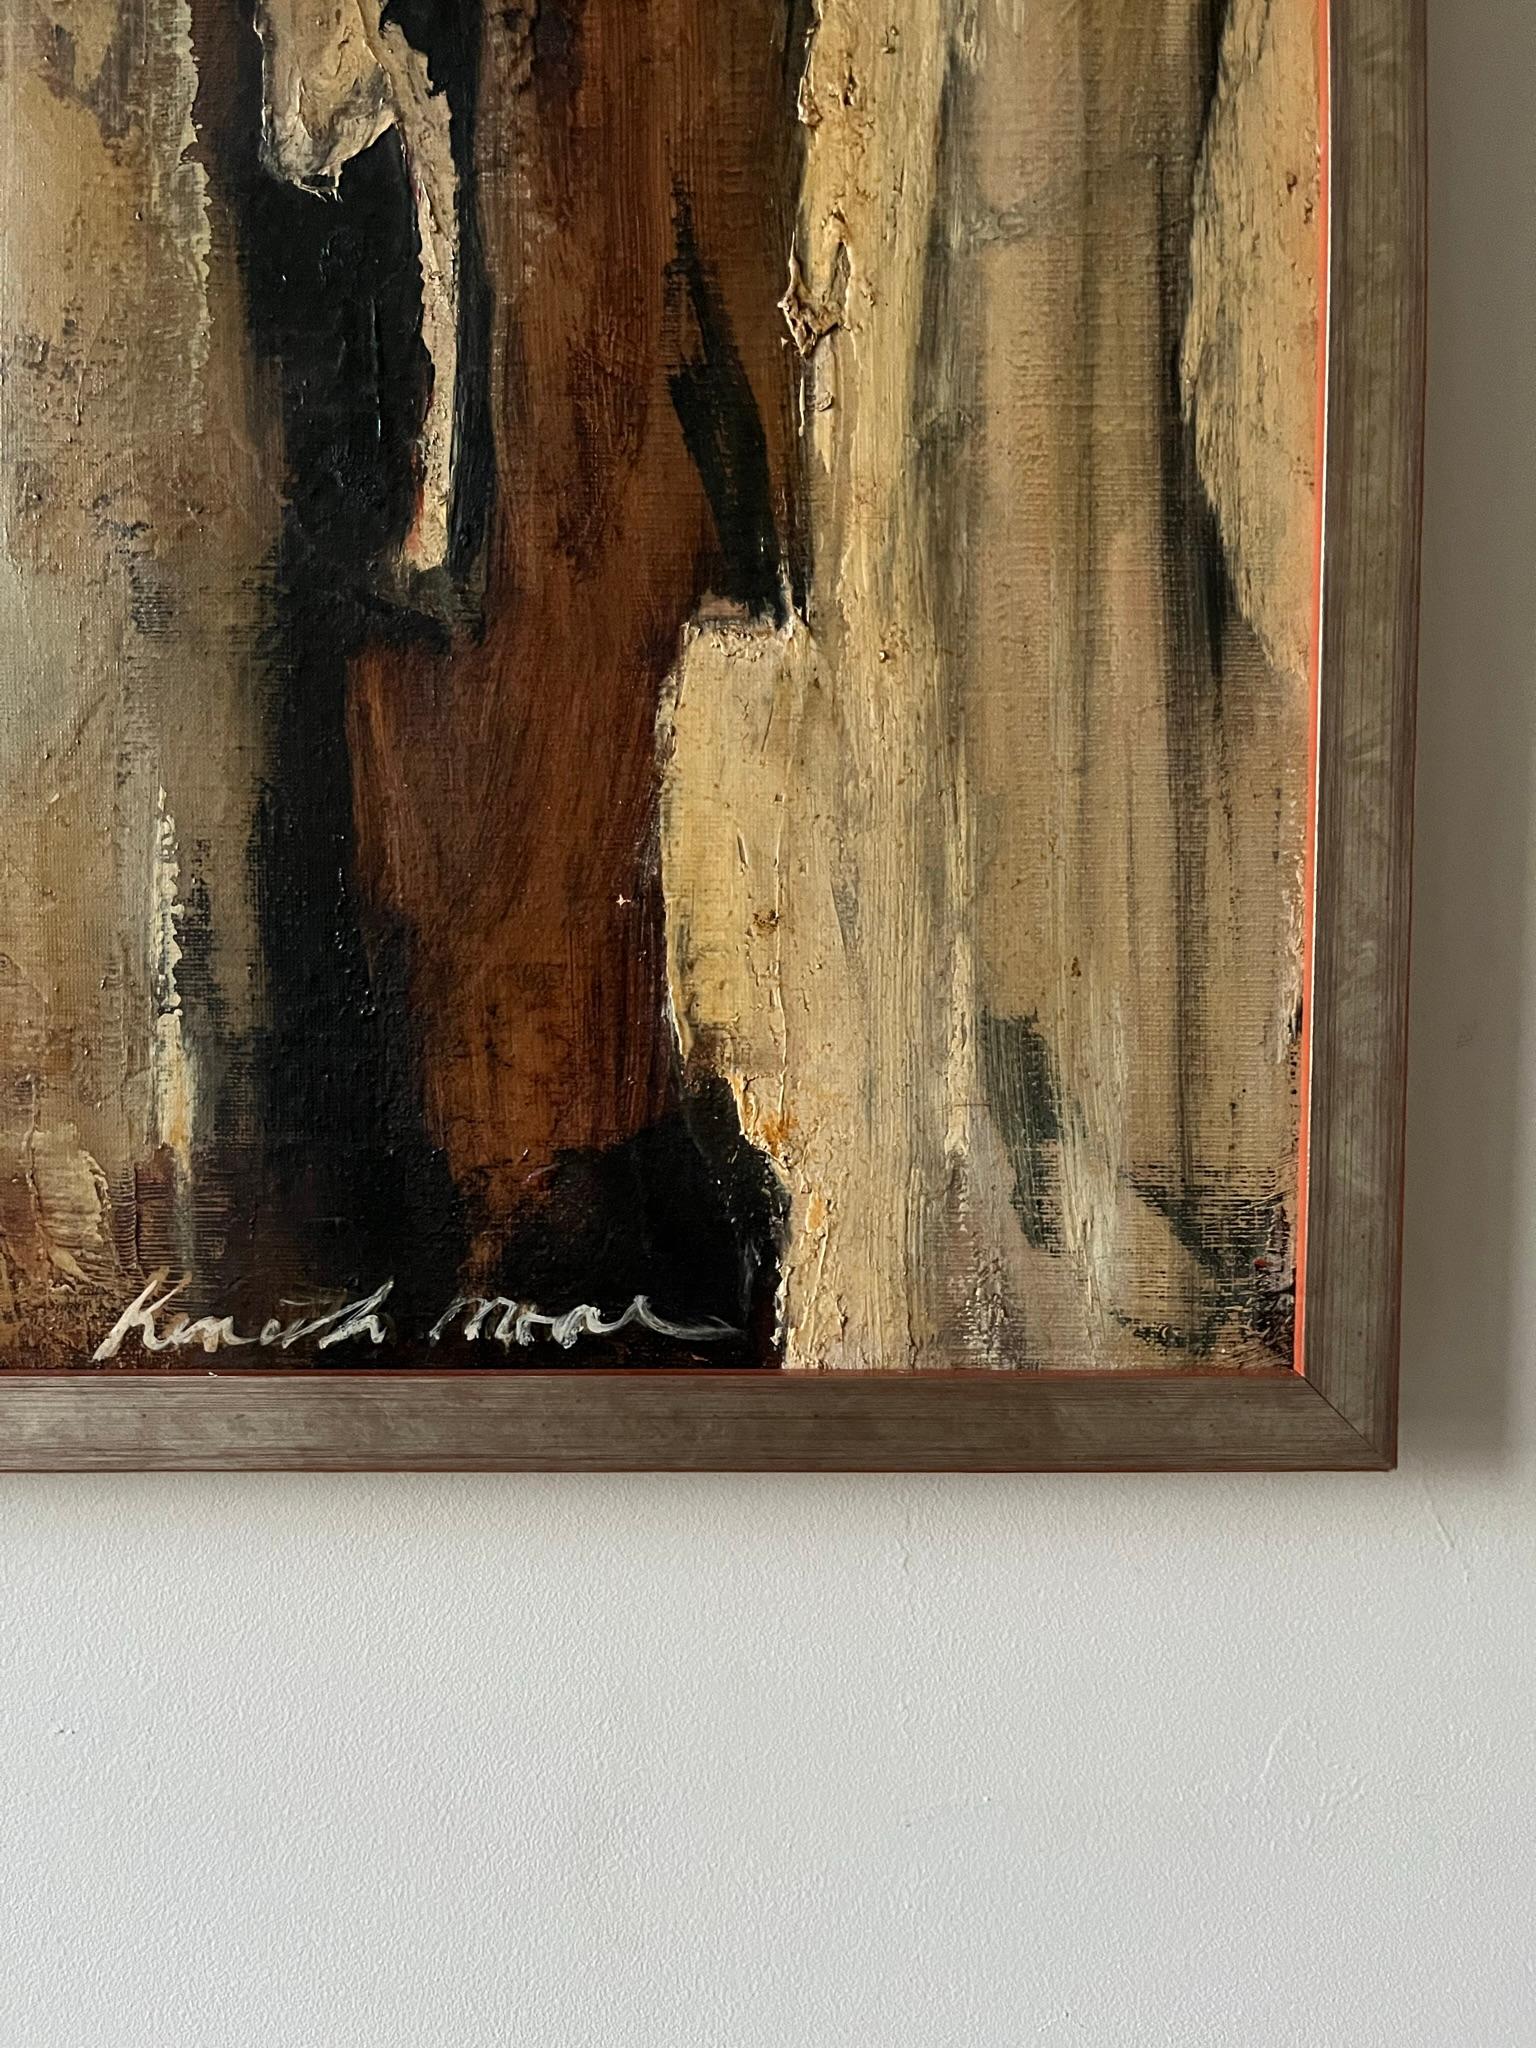 A striking tall abstract painting by the Australian artist Kenneth Moore. Re stretched and framed. Titled verso Ritual X, London 1959.